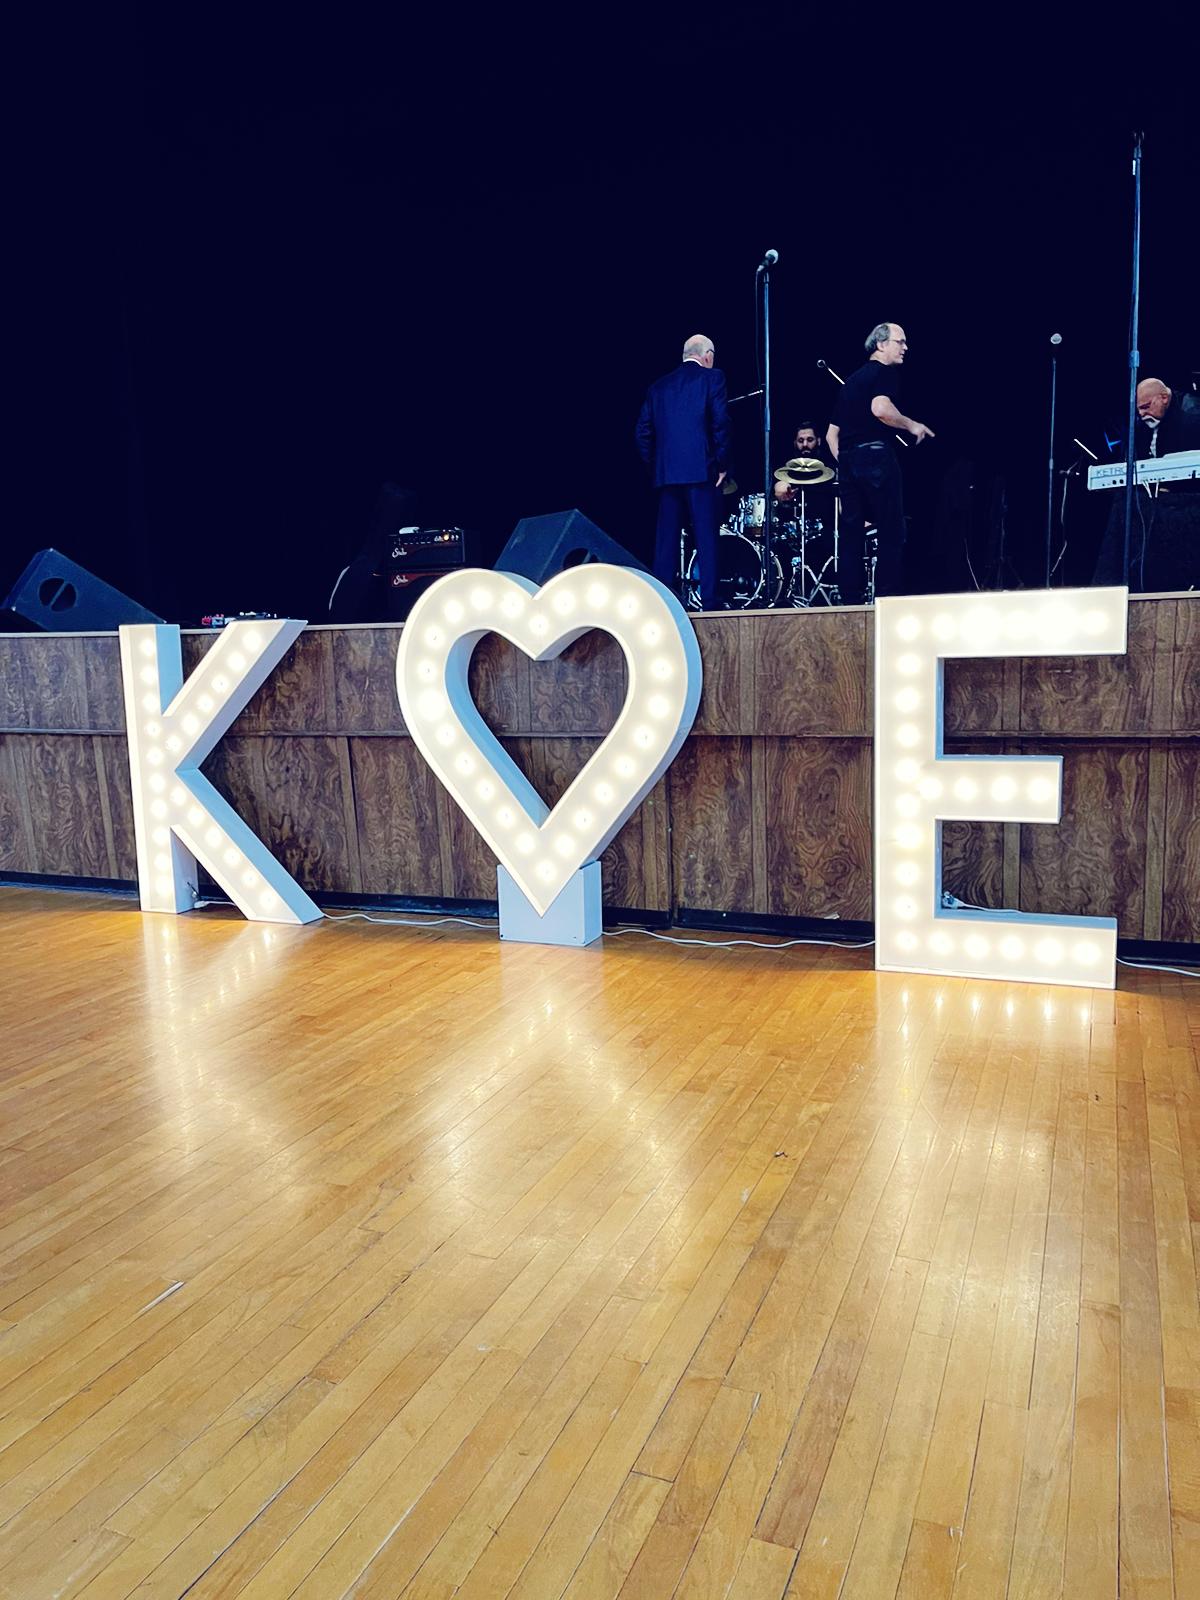 angus wedding marquee letters